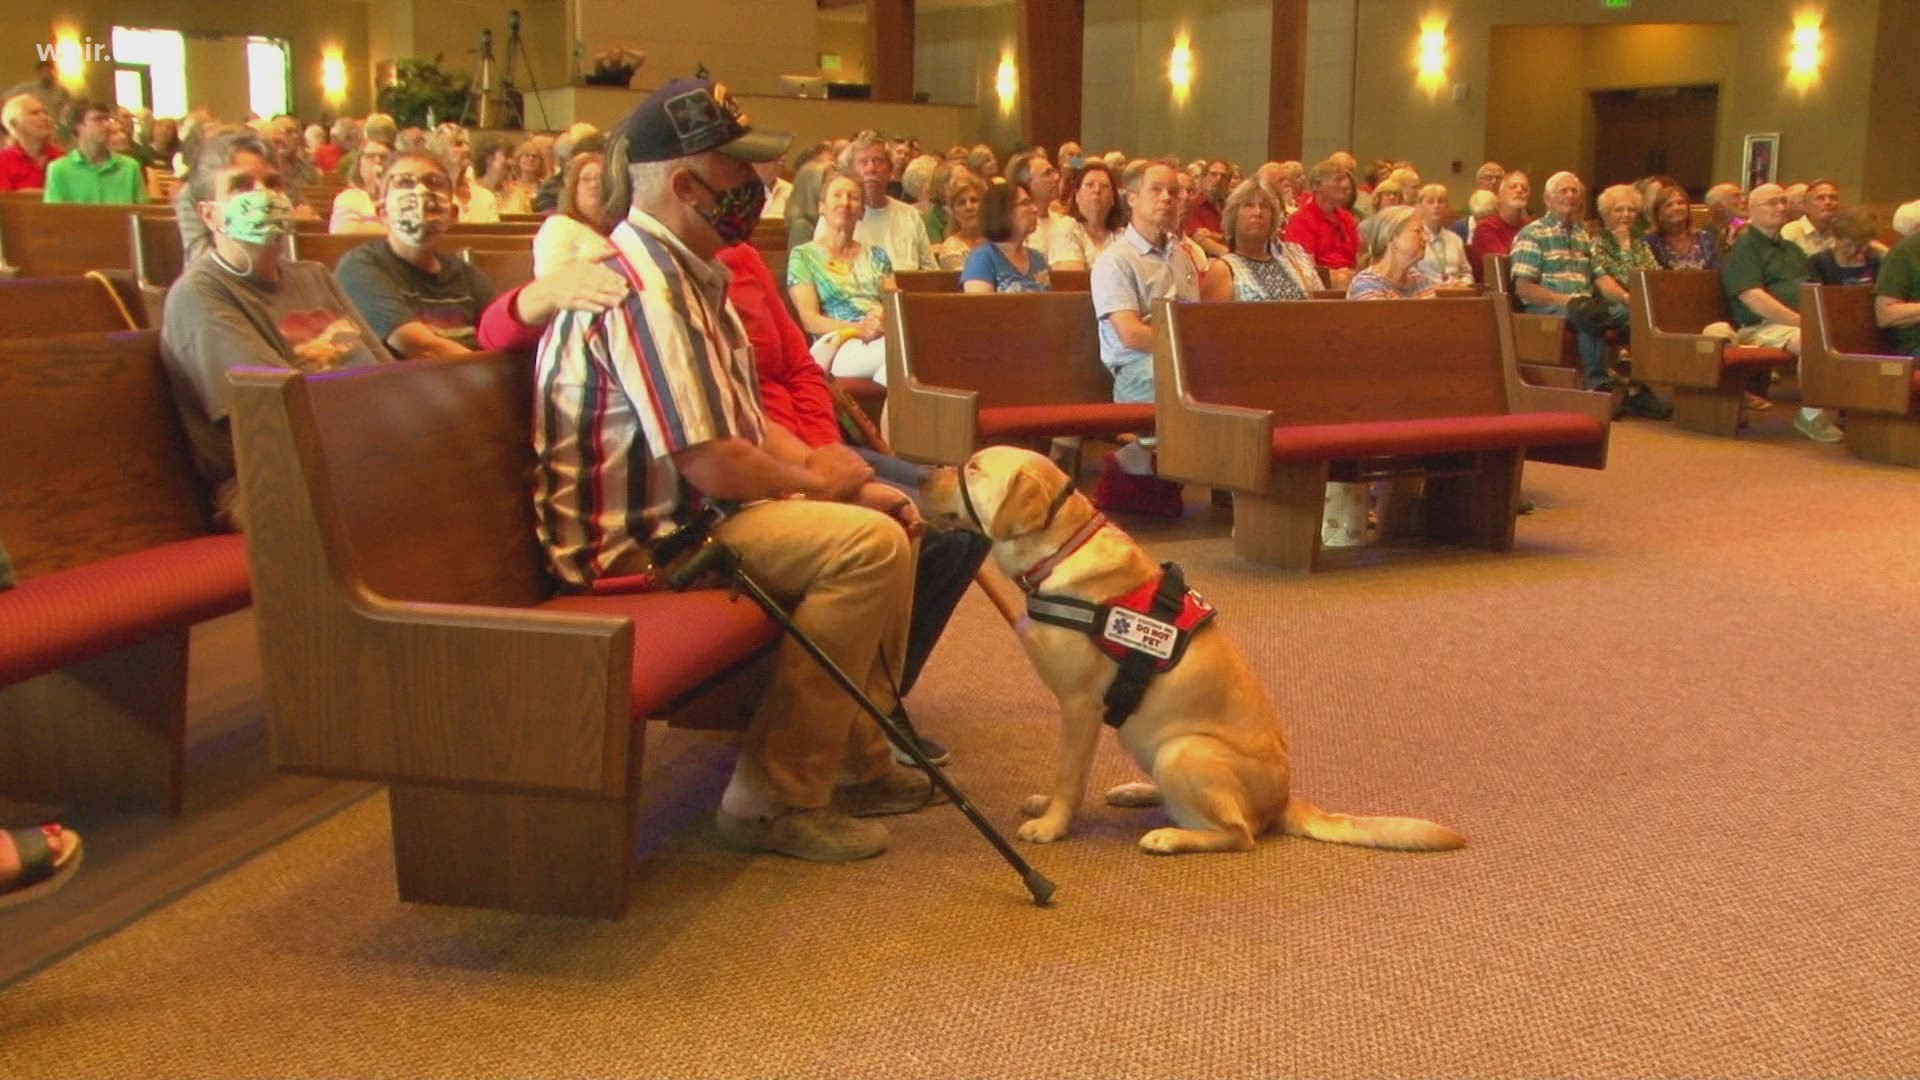 Smoky Mountain Service Dogs passed a leash to US Army Sergeant first class Veteran Timmy Moyers.